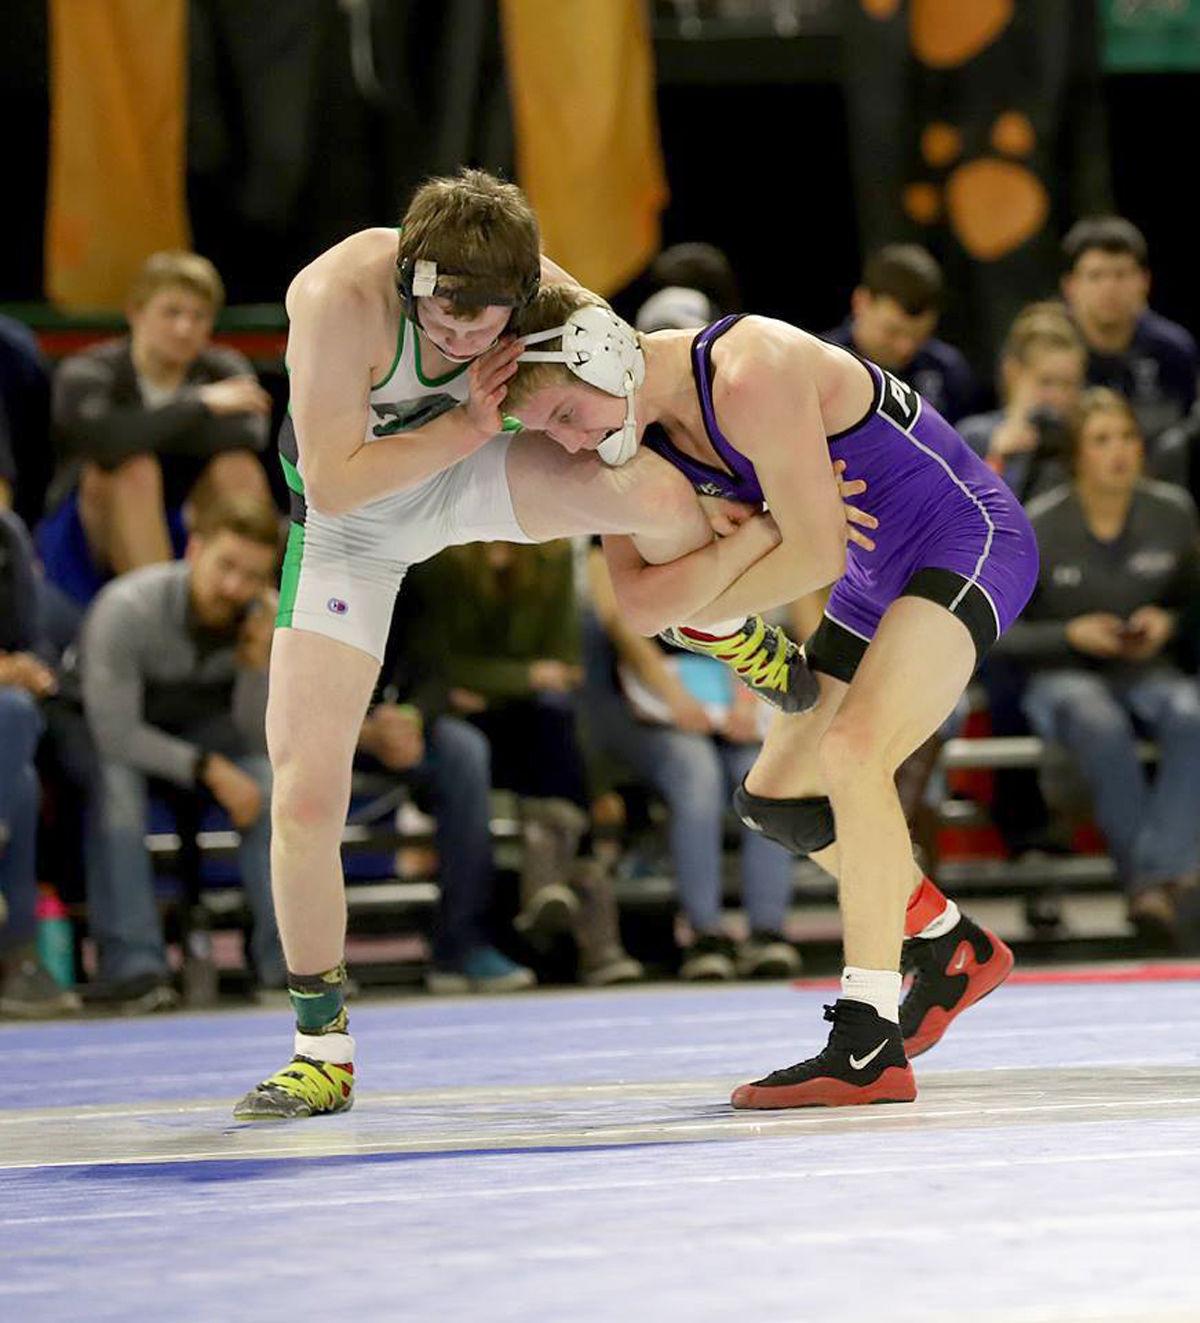 Belgrade’s Mears wins second state wrestling title Local Sports